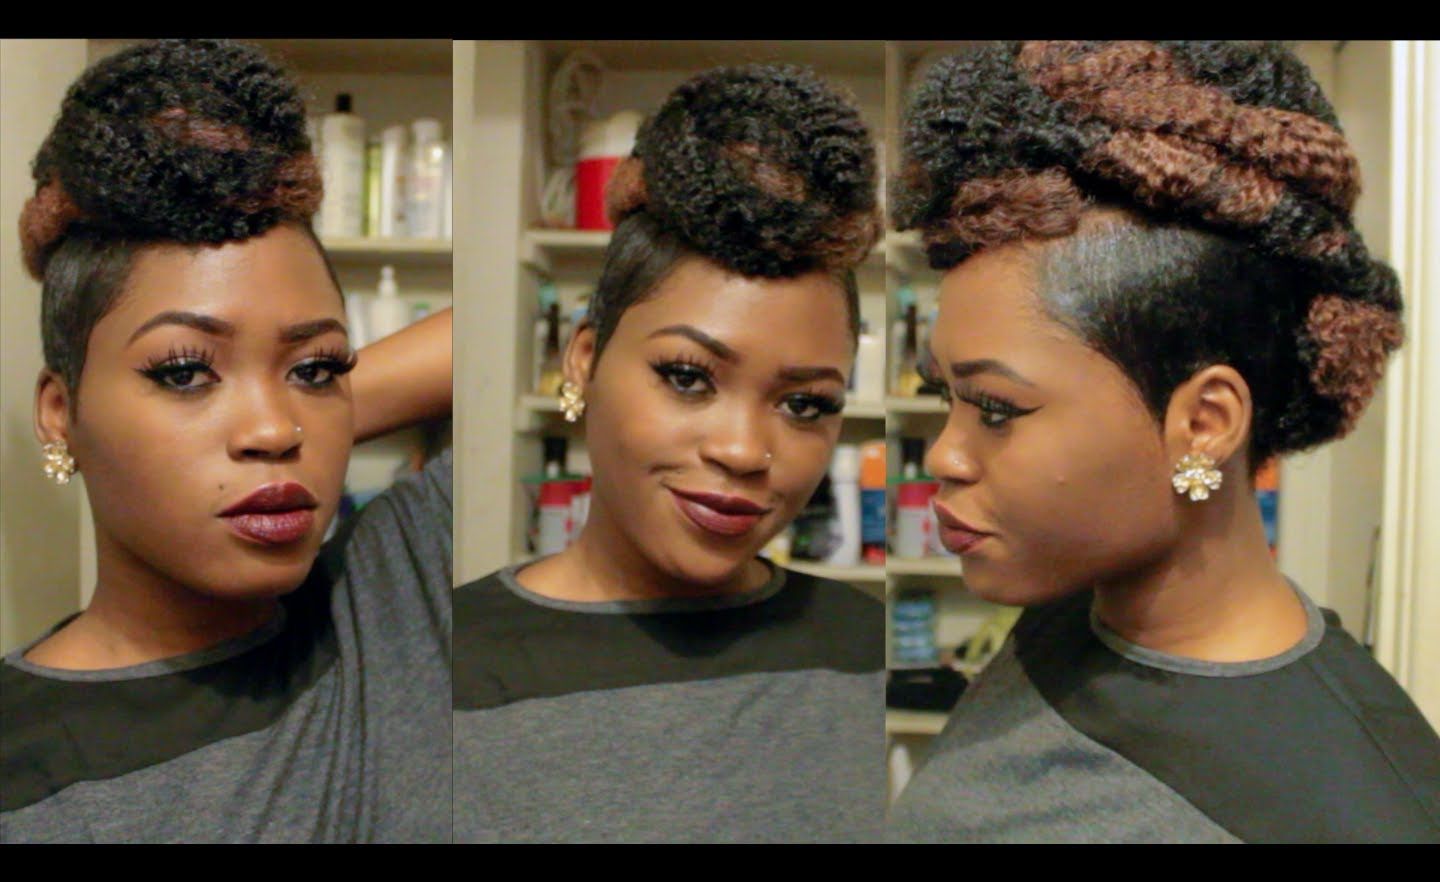 [%most Recent Side Mohawk Hairstyles With Mohawk Updo With Shaved Sides [video] – Black Hair Information|mohawk Updo With Shaved Sides [video] – Black Hair Information Throughout Well Known Side Mohawk Hairstyles%] (View 12 of 20)